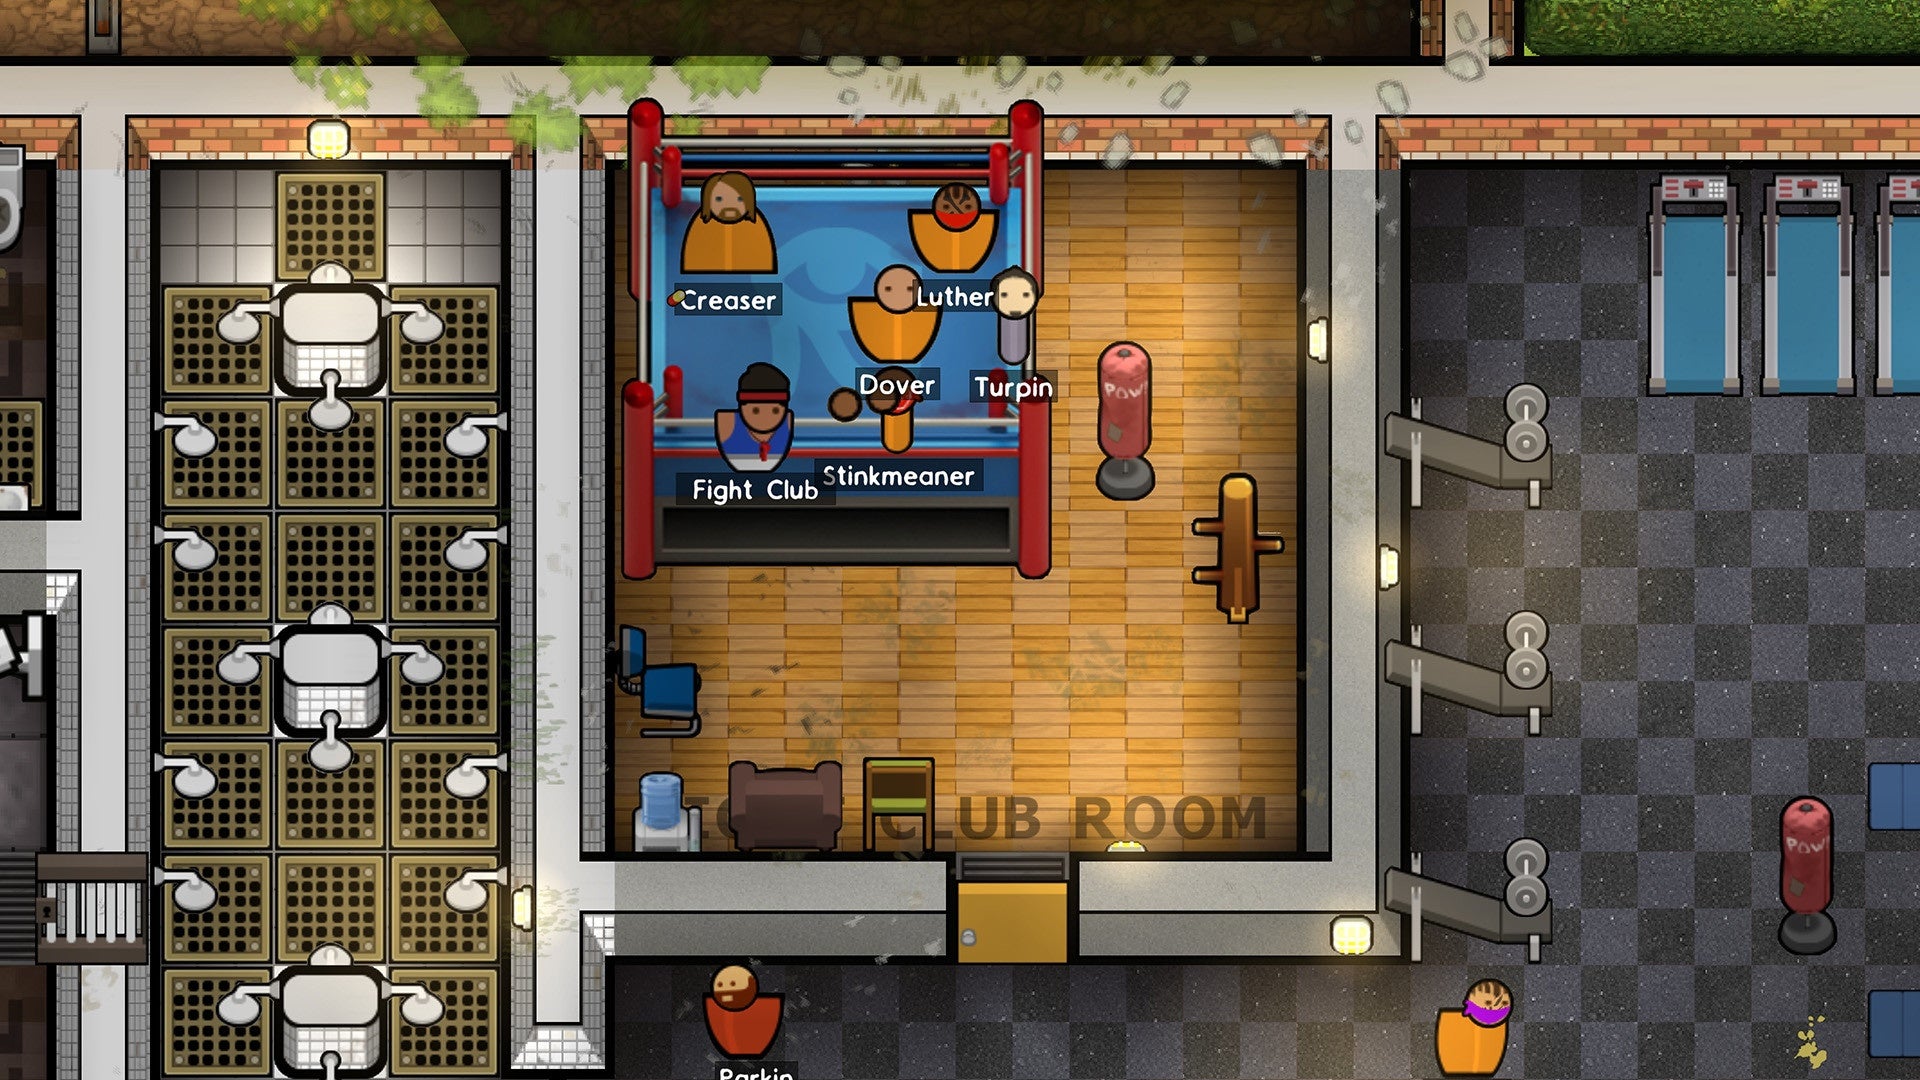 Battle expanded gangs and crooked guards in Prison Architect's Gangs DLC thumbnail